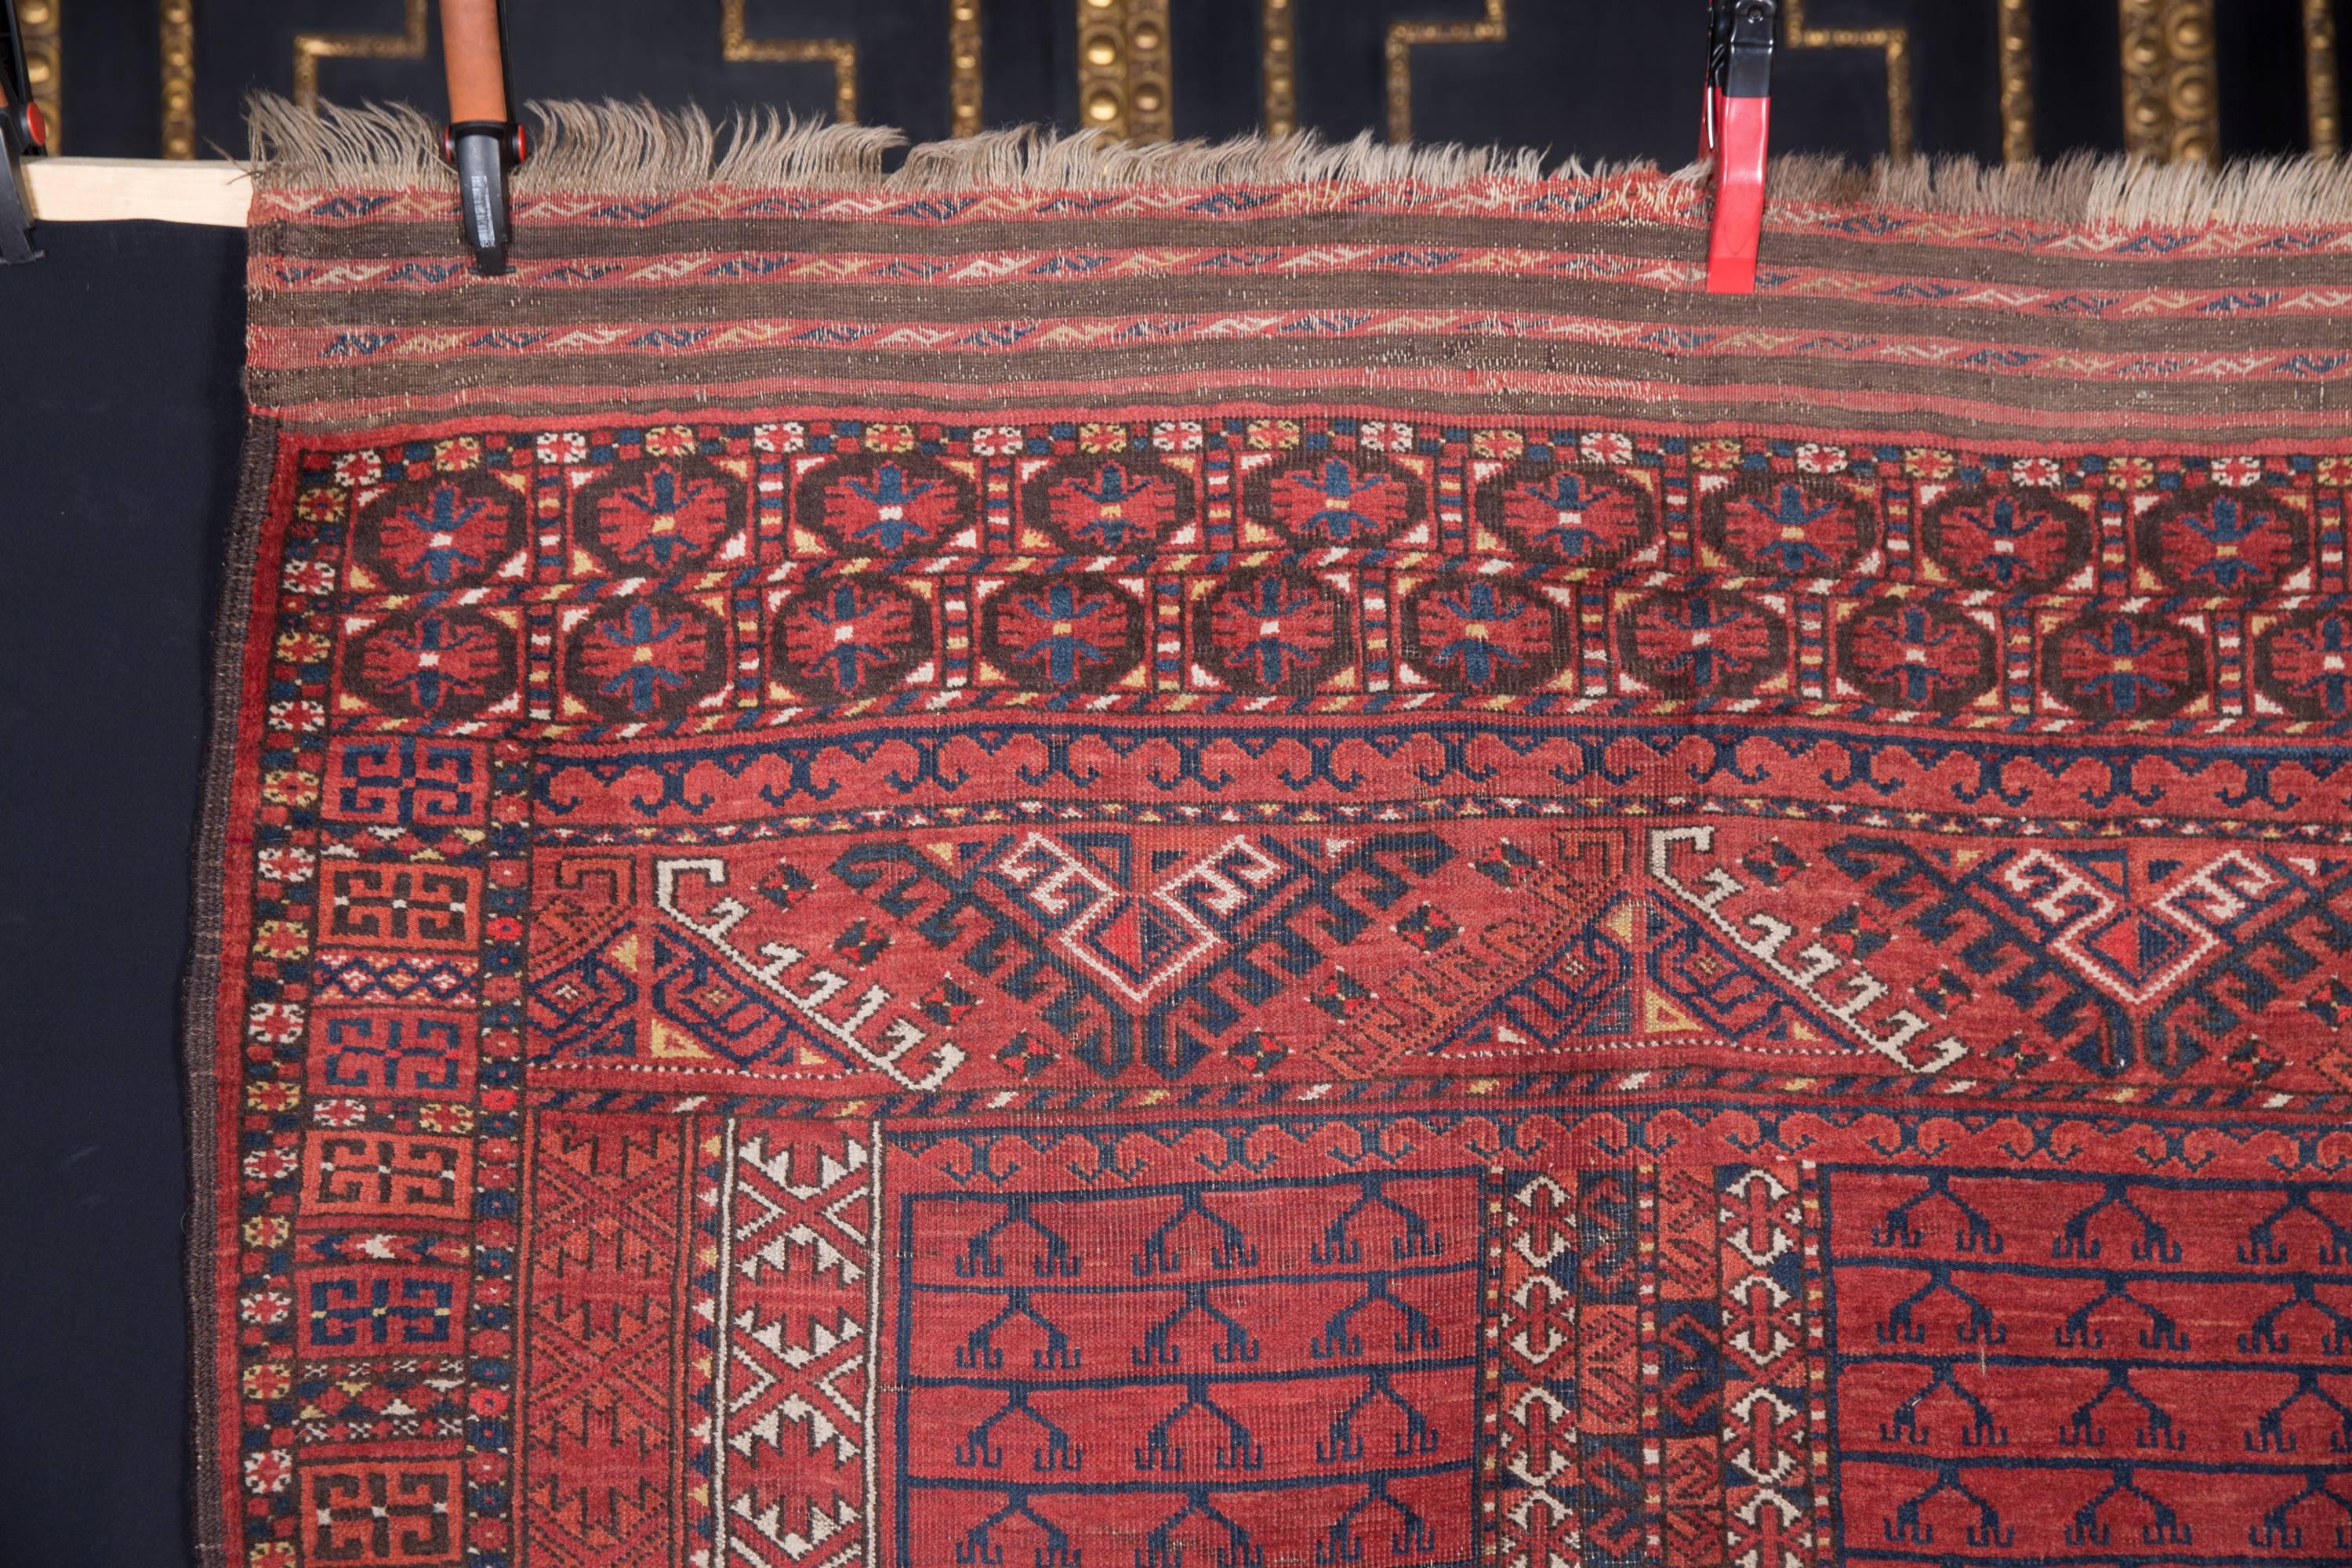 Beautiful rare ersari rug. From Berlin villa resolution.

Please take a look at the detailed pictures.